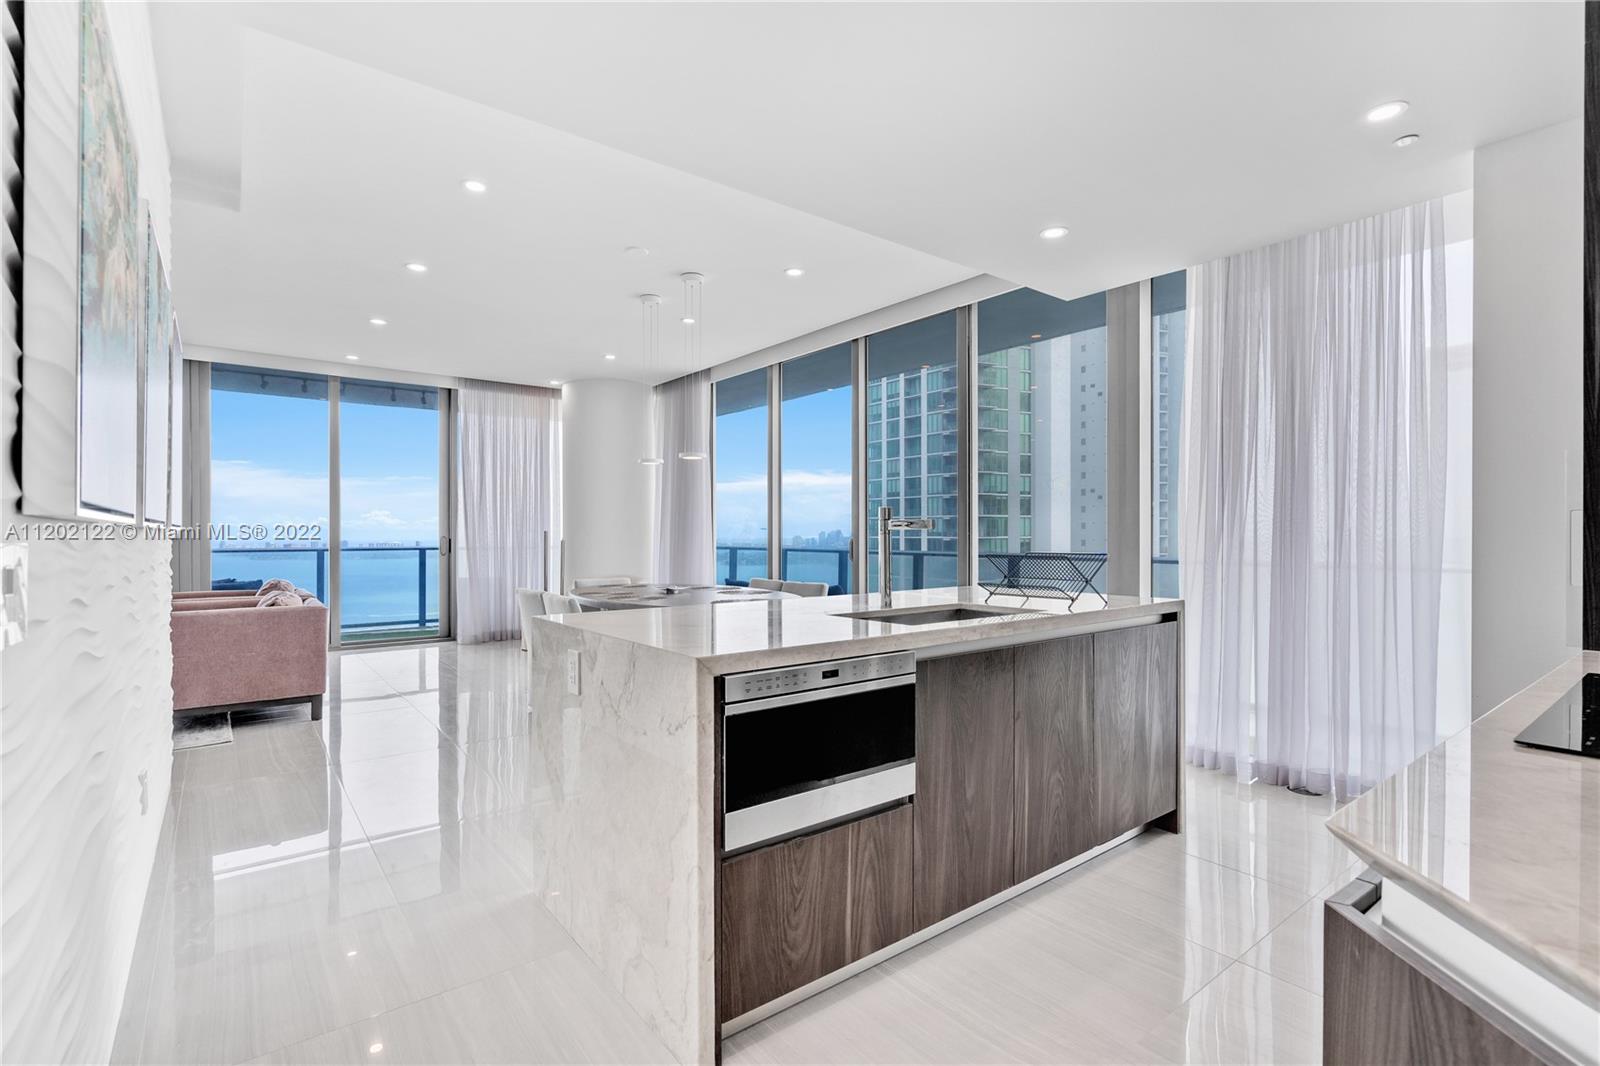 Beautiful 3 Bedroom 3.5 Bath SE Corner Residence. Enjoy the unobstructed water views and amazing downtown city views on the 180 degree wraparound balcony. This unit includes 1 parking spot, along with a wine locker and cigar locker.